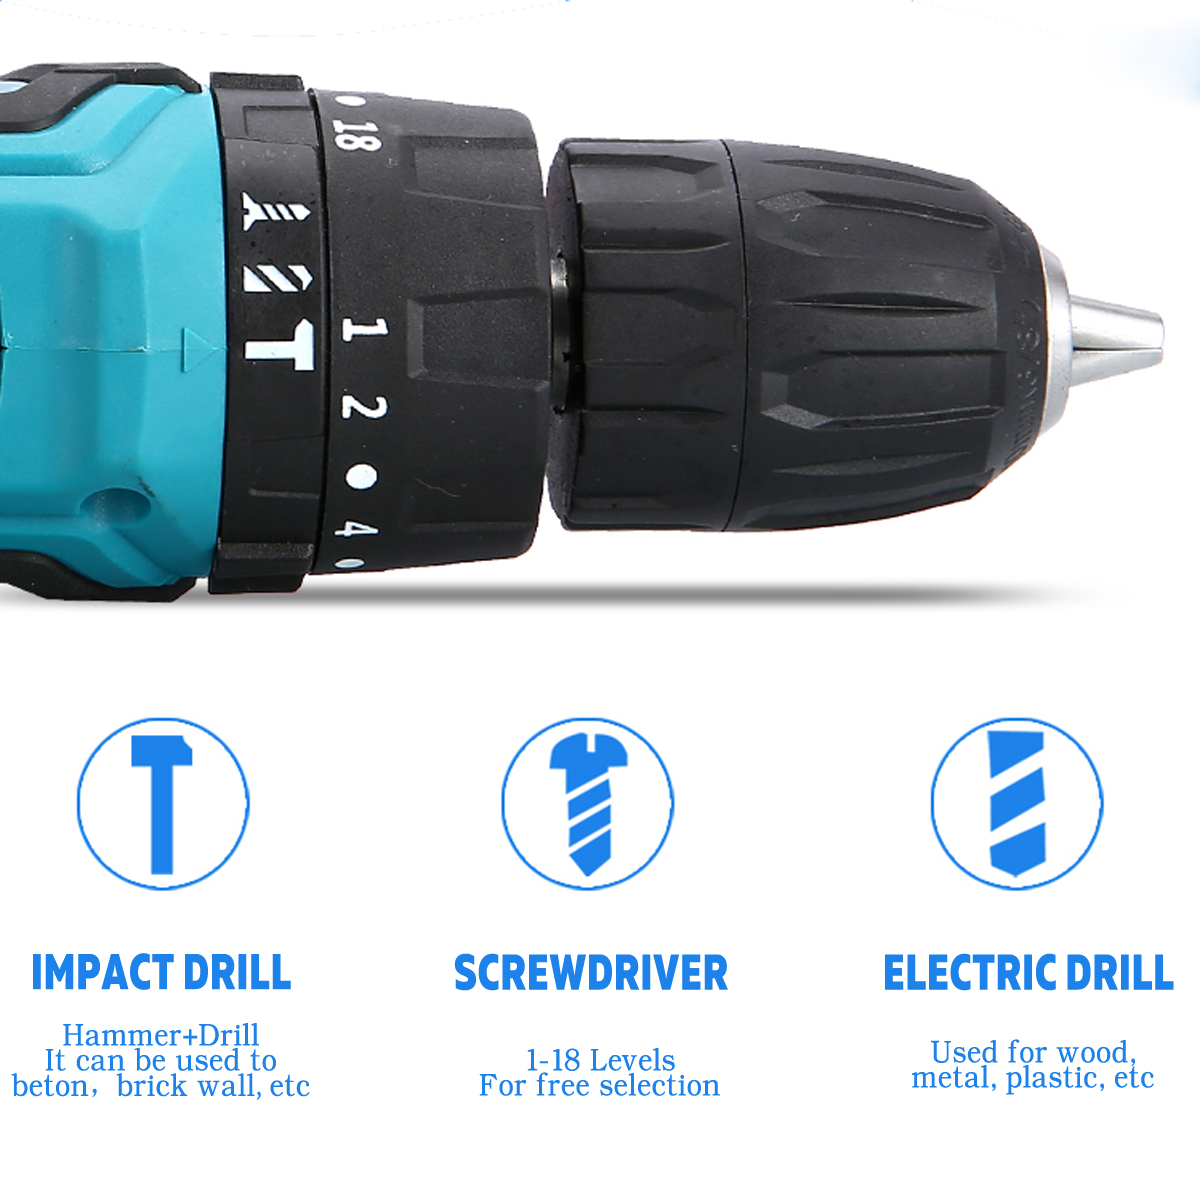 12V-Cordless-Electric-Impact-Drill-Multi-function-Hand-Hammer-Screwdriver-Lithium-Battery-Rechargabl-1452371-4